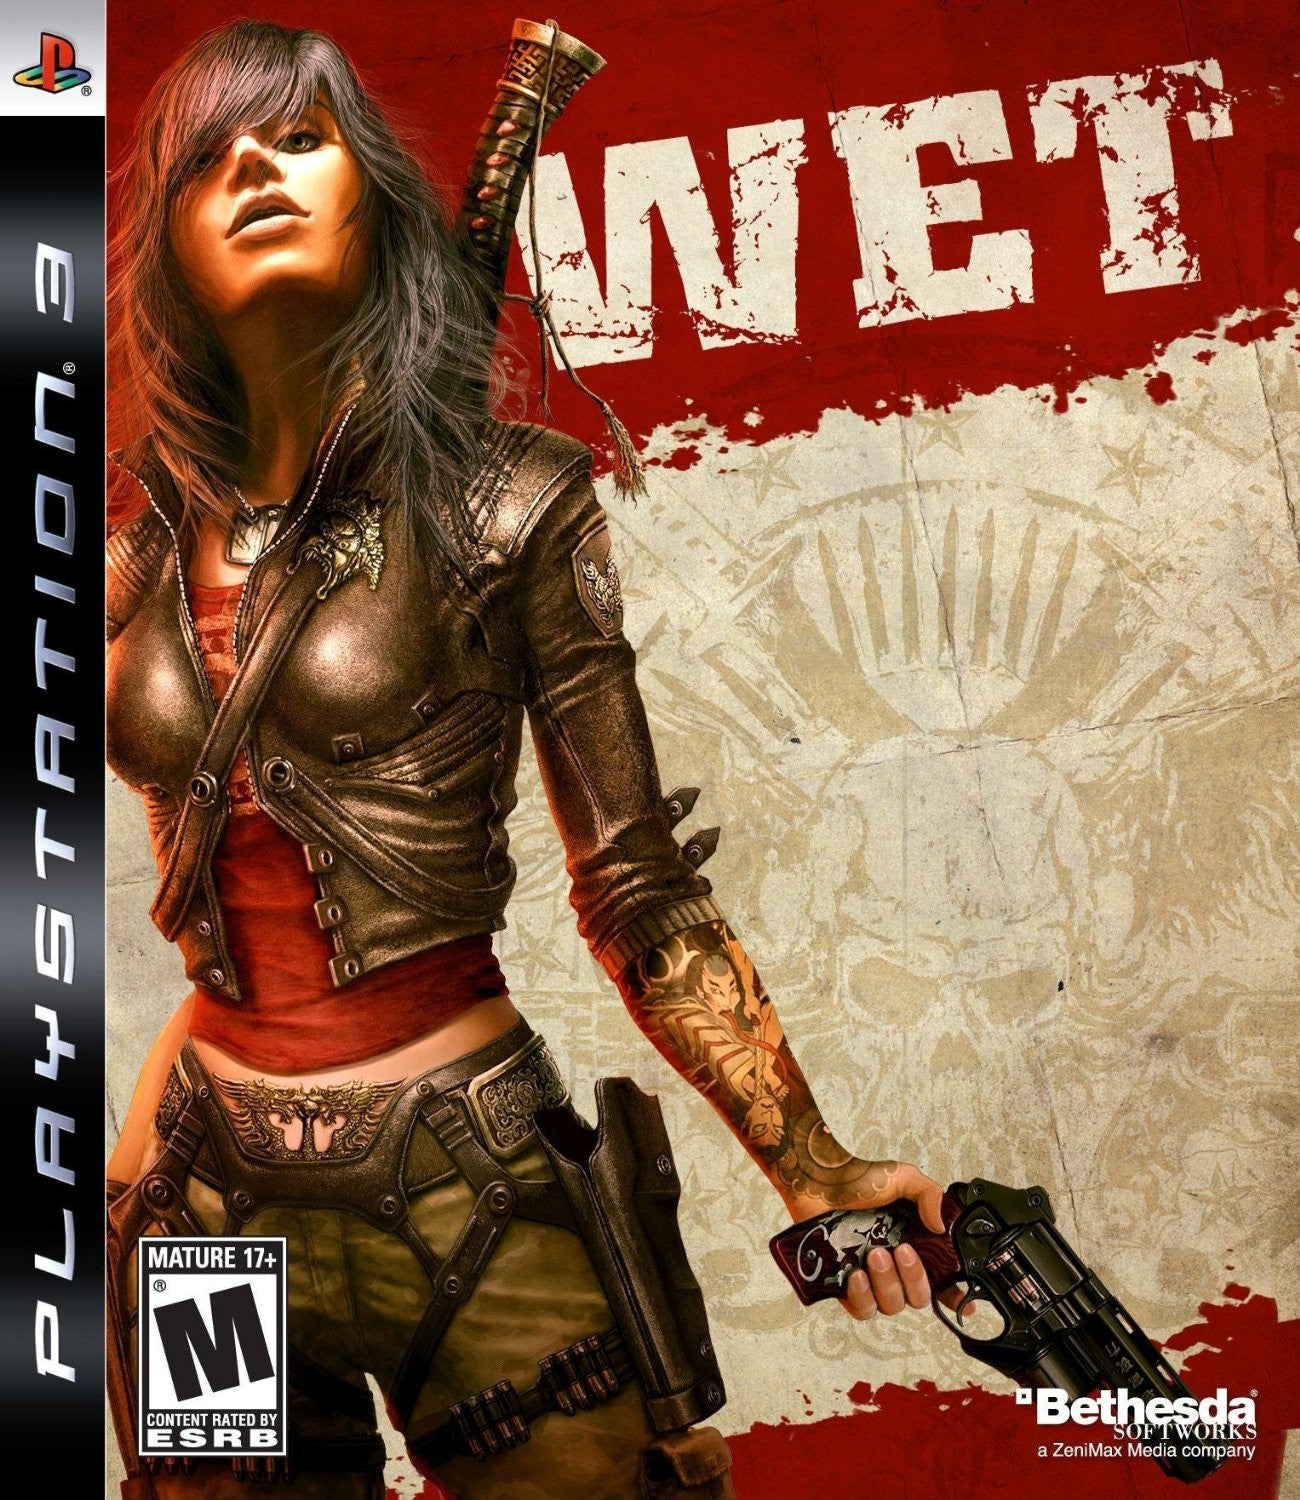 WET - Playstation 3